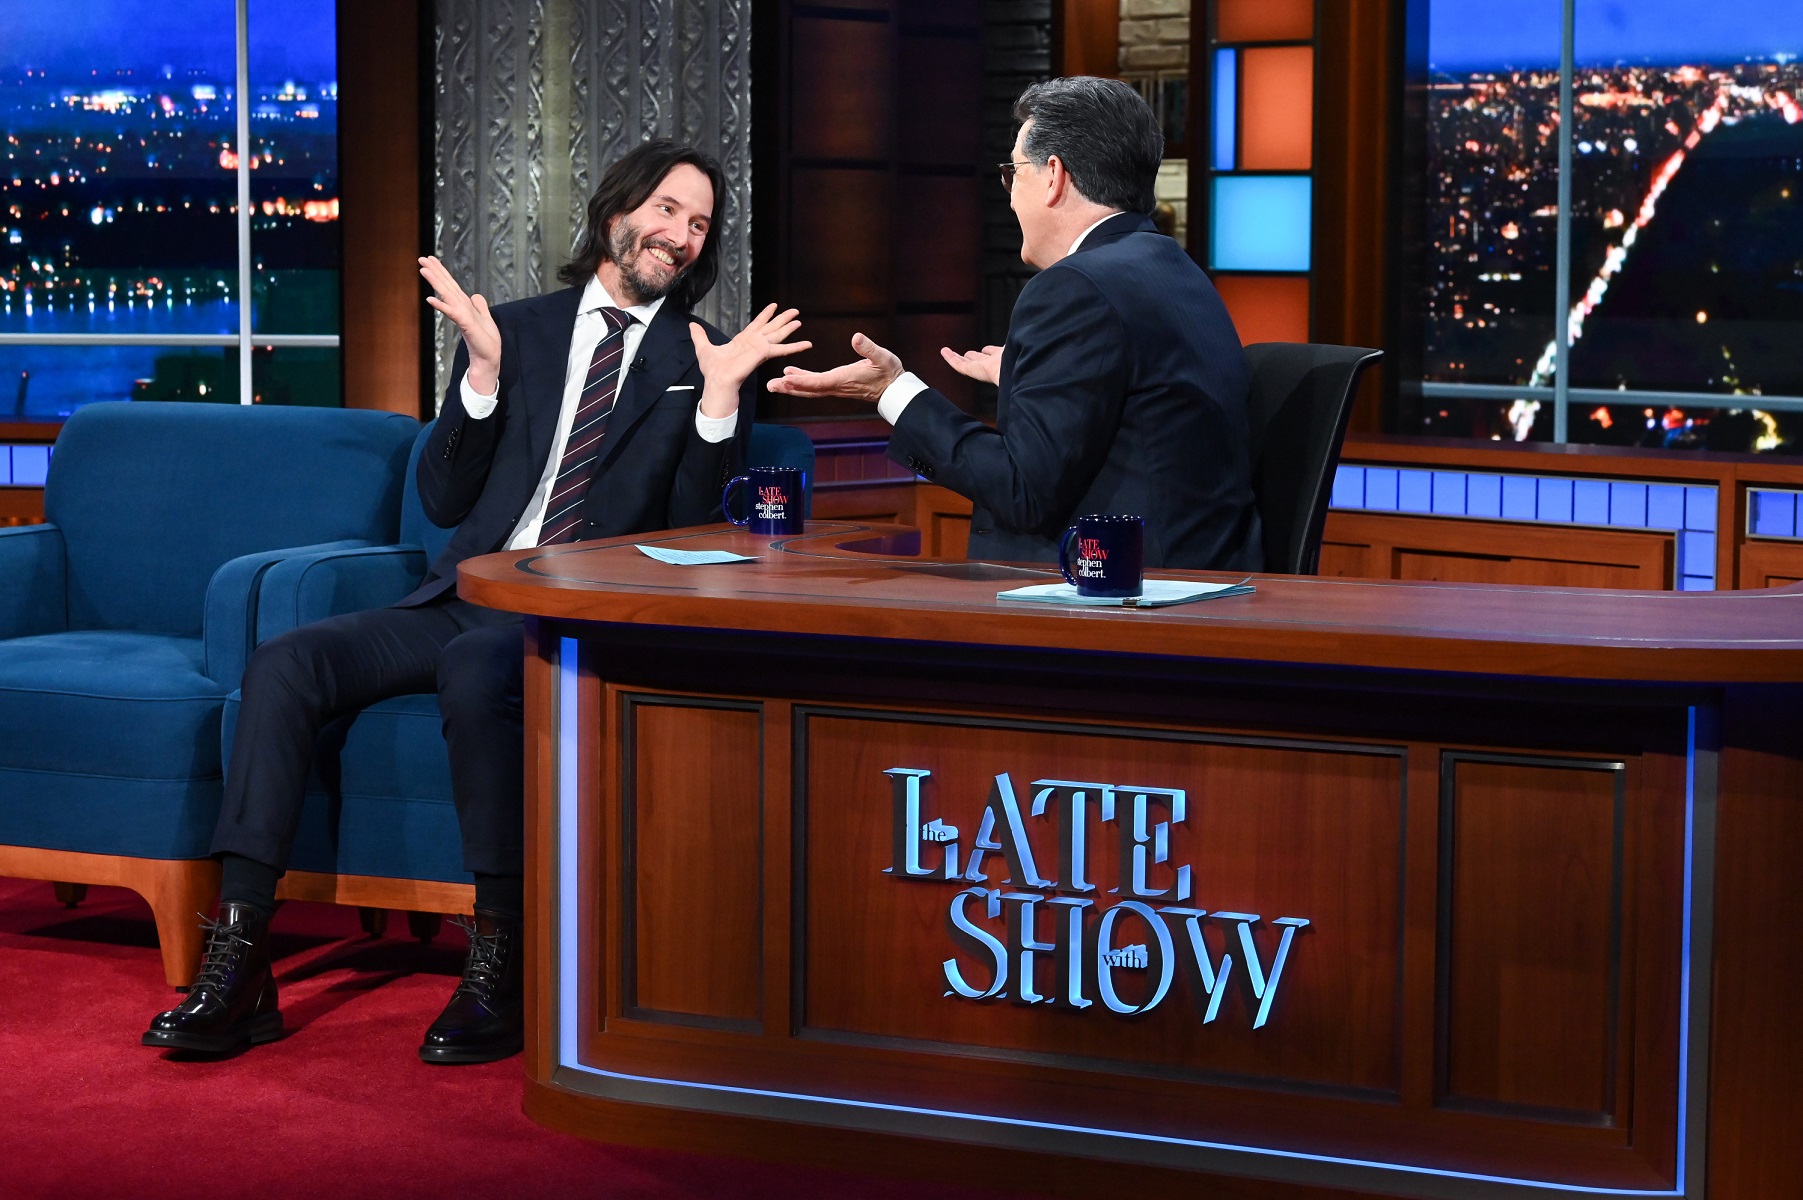 Keanu Reeves chats with Stephen Colbert on the set of 'The Late Show' on Dec. 13, 2021